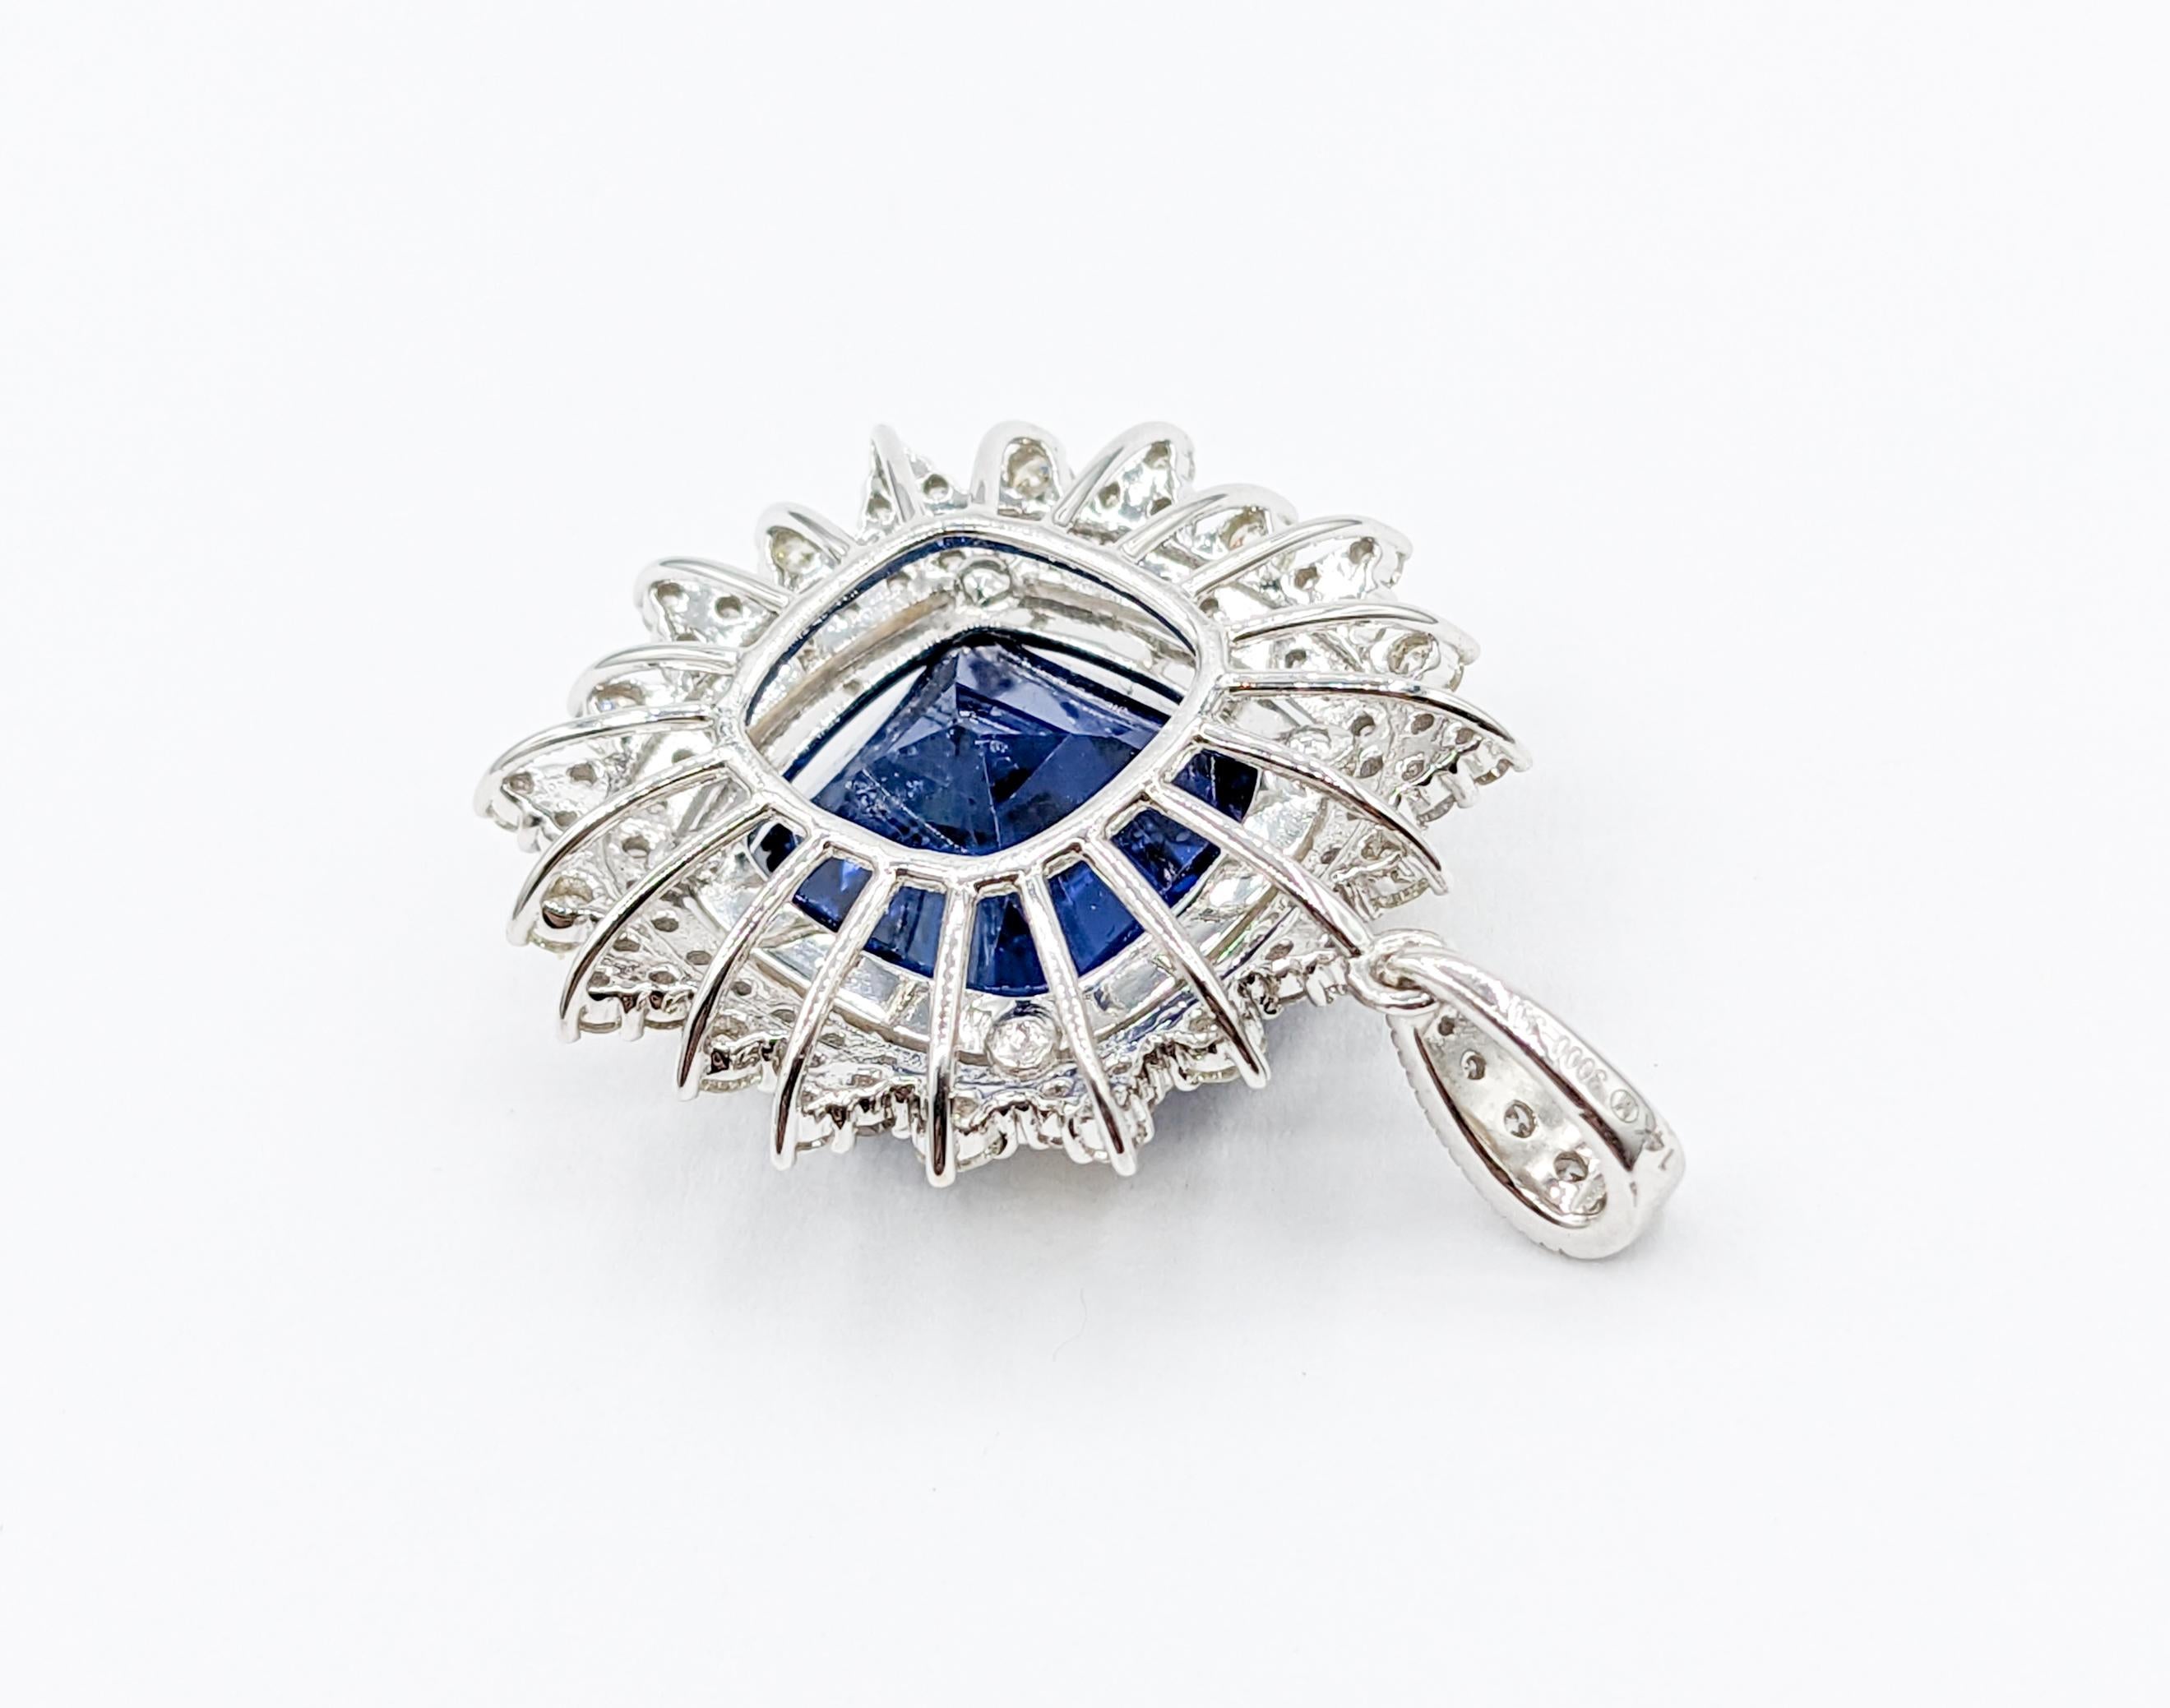 Contemporary Stunning 14.2ct Sapphire Pendant with Diamond Halo in 14kt White Gold For Sale